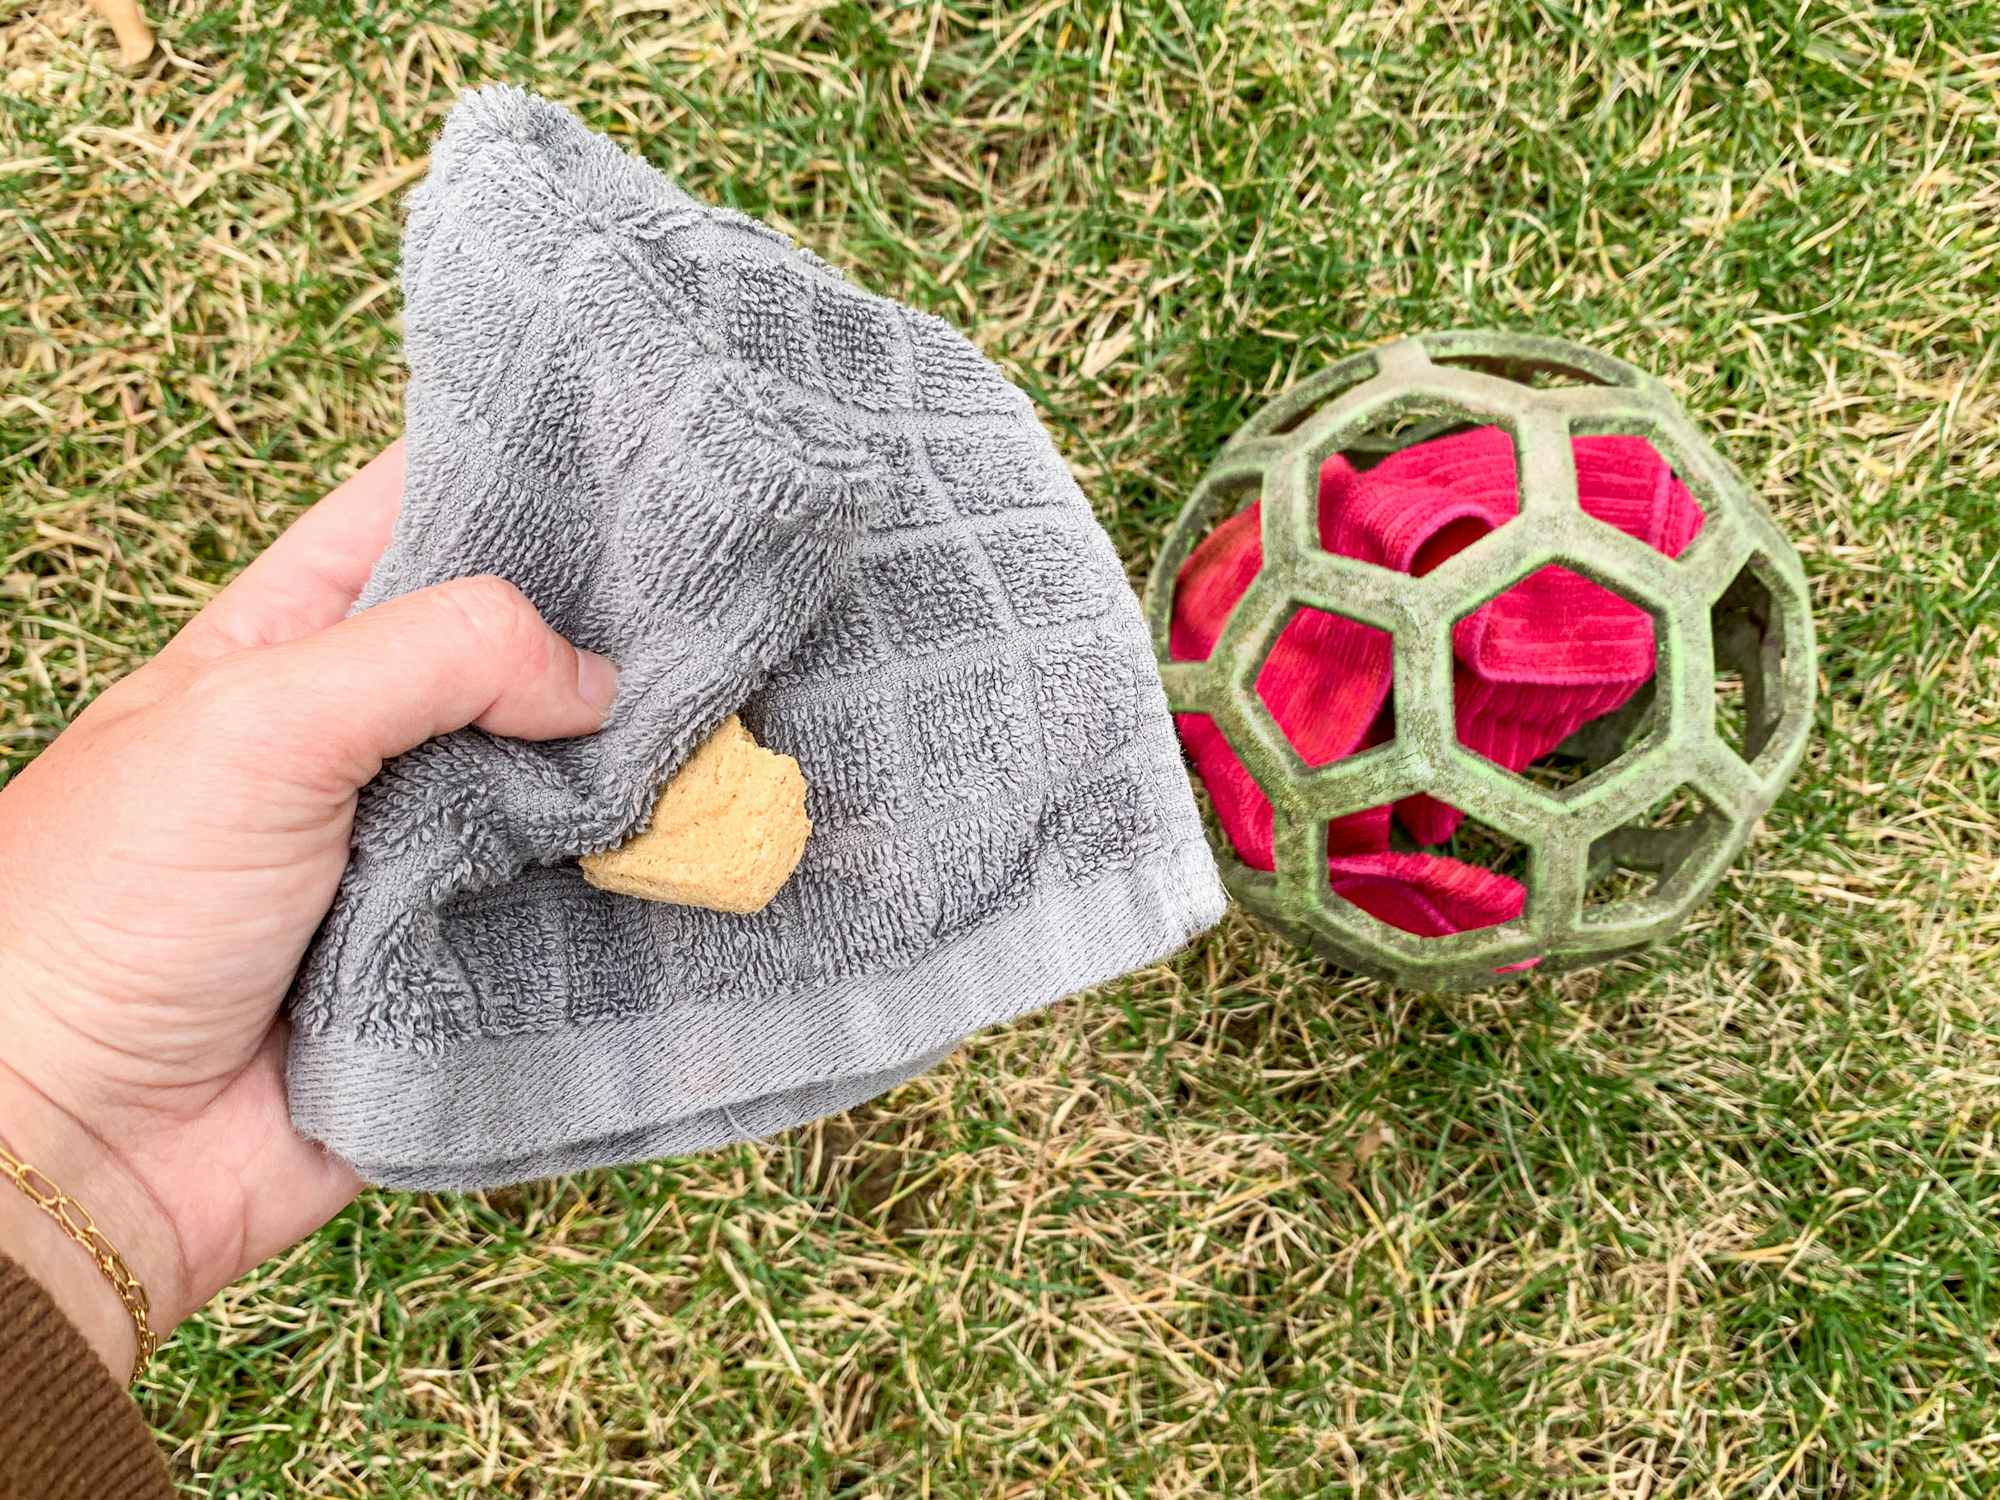 a person stuffing a ball with old wash clothes and treats